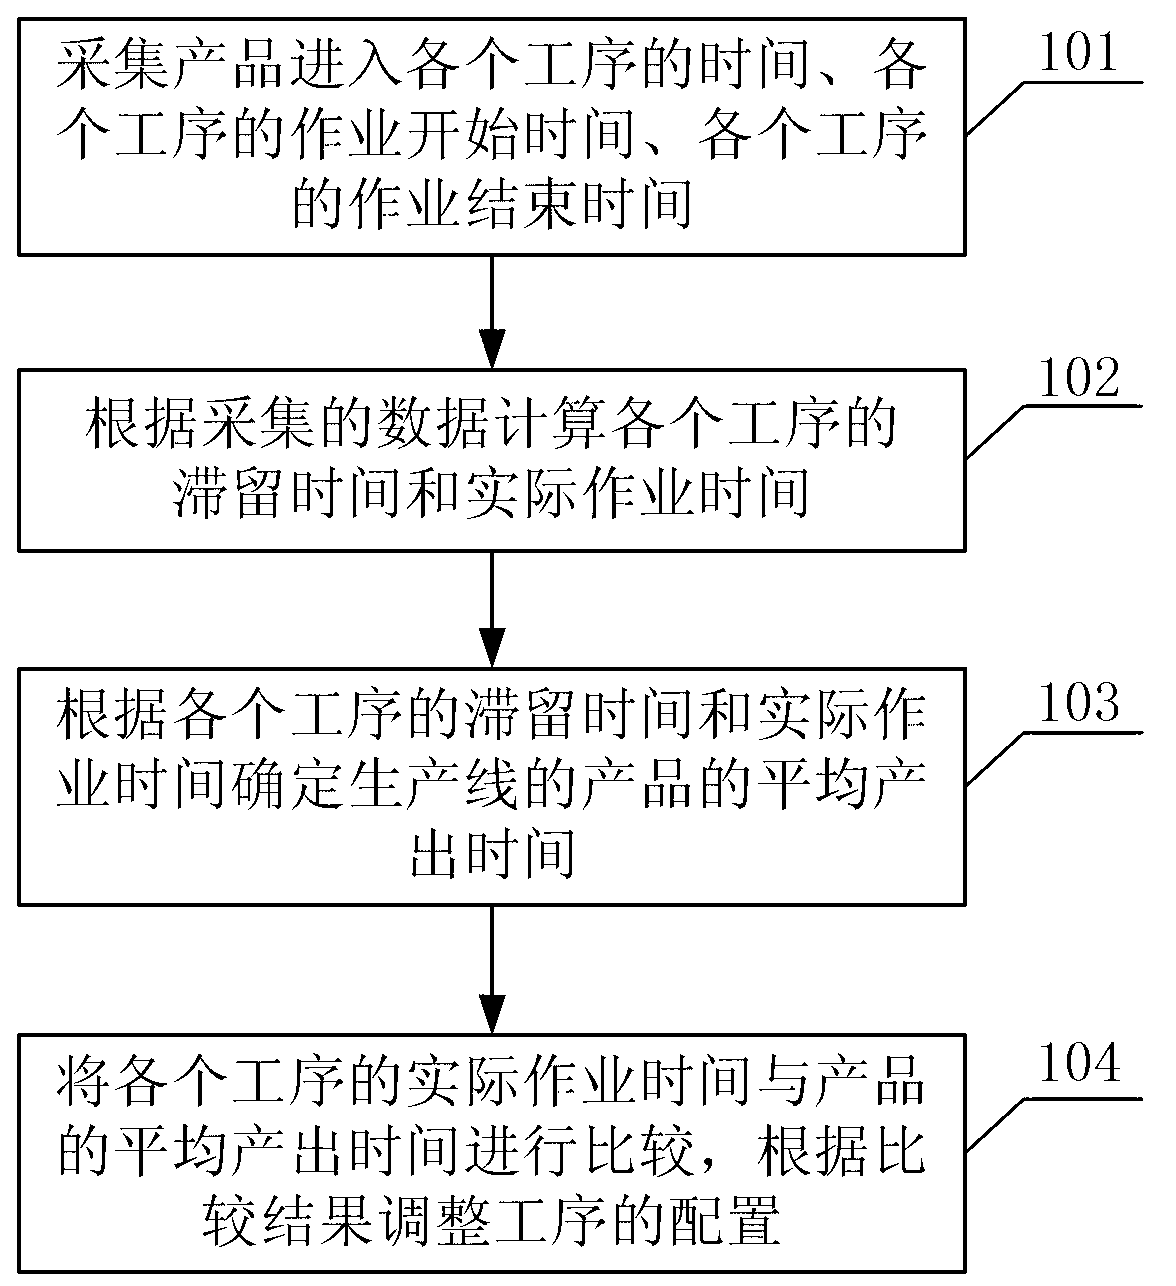 Method and system for production monitoring